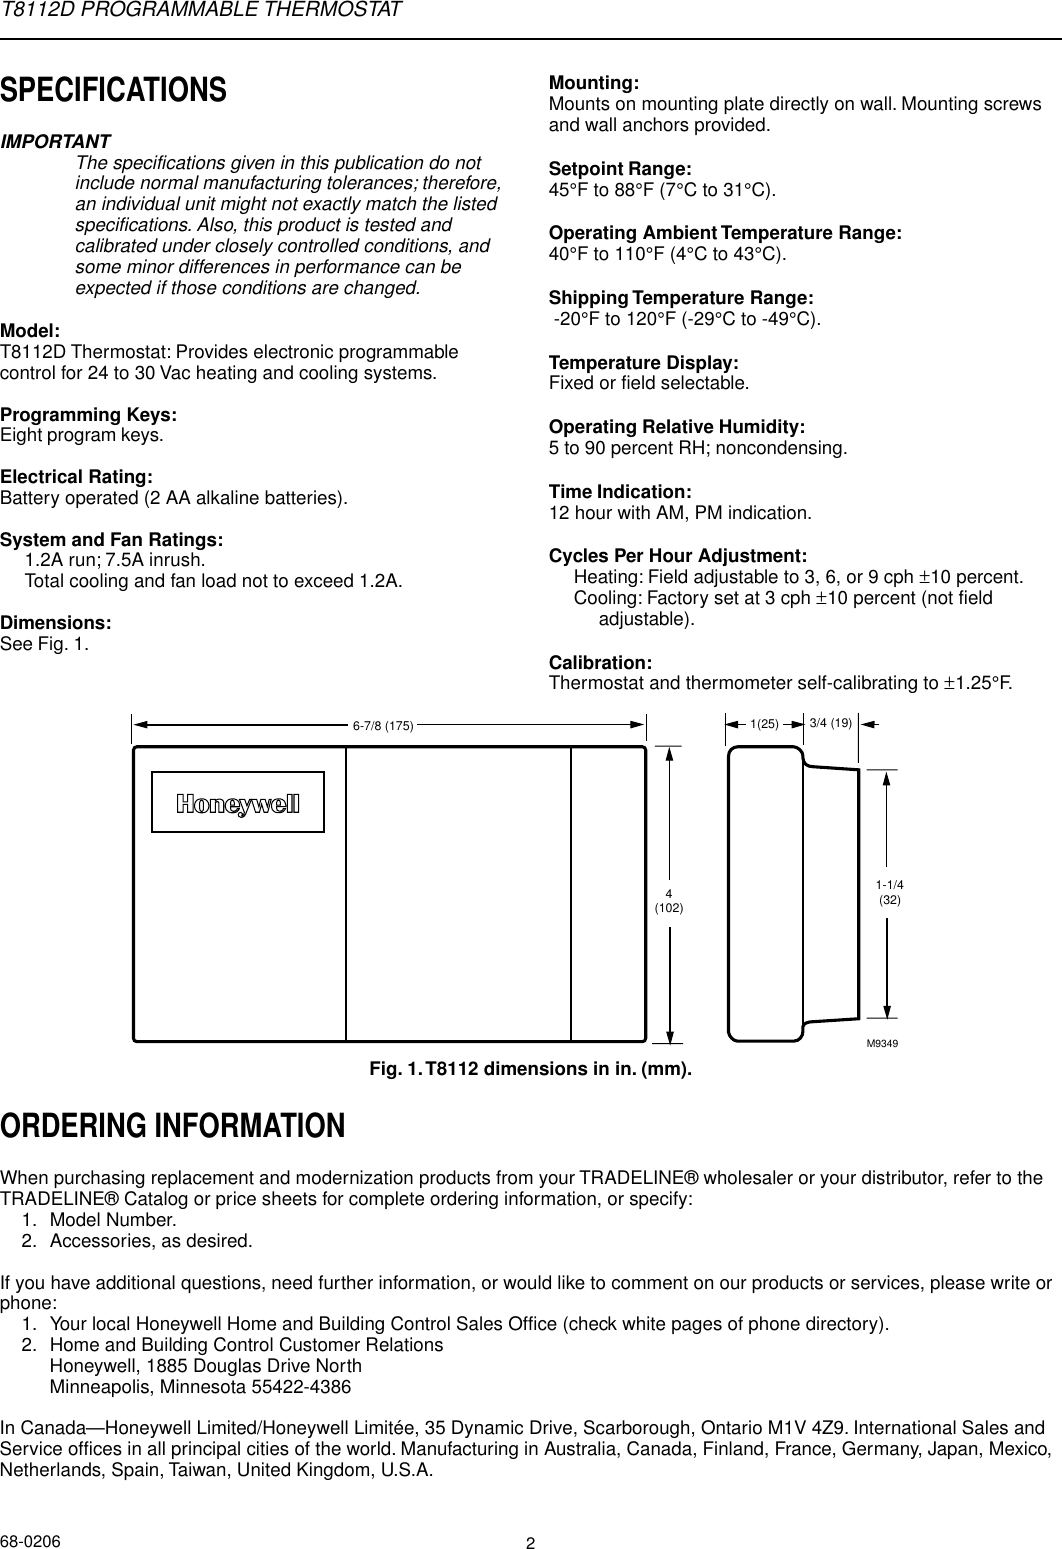 Page 2 of 8 - Honeywell Honeywell-Honeywell-Thermostat-T8112D-Users-Manual- 68-0170 - T8112 Programmable Thermostat  Honeywell-honeywell-thermostat-t8112d-users-manual